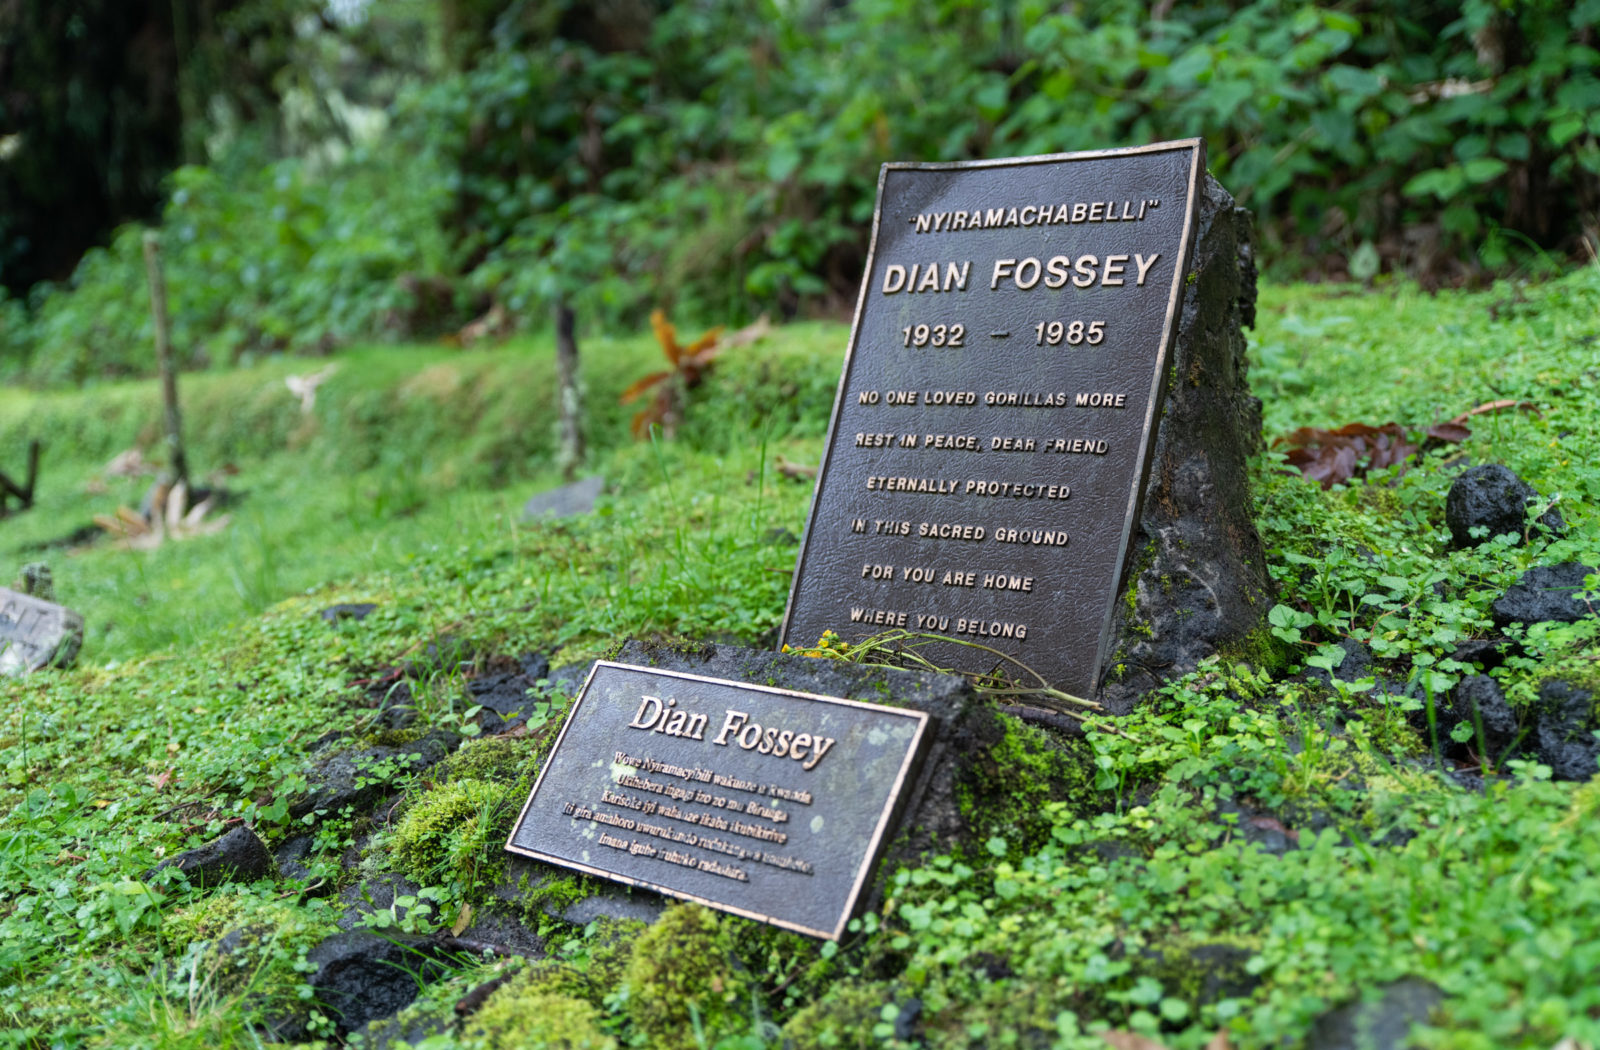 Dian Fossey Research Camp and Grave